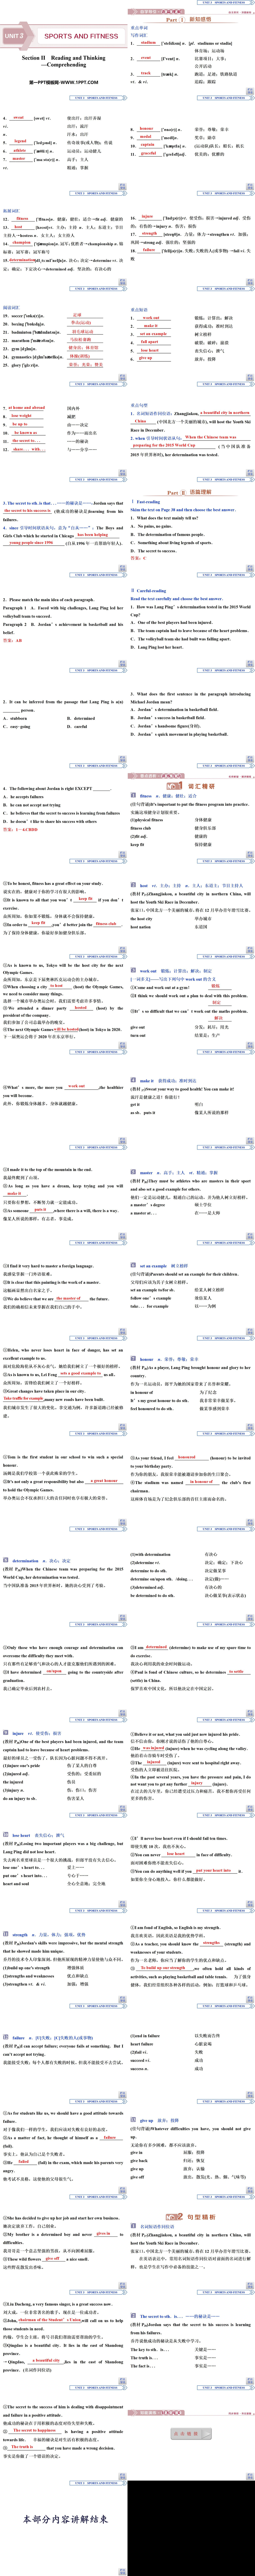 《Sports and Fitness》Reading and Thinking PPT课件
（2）